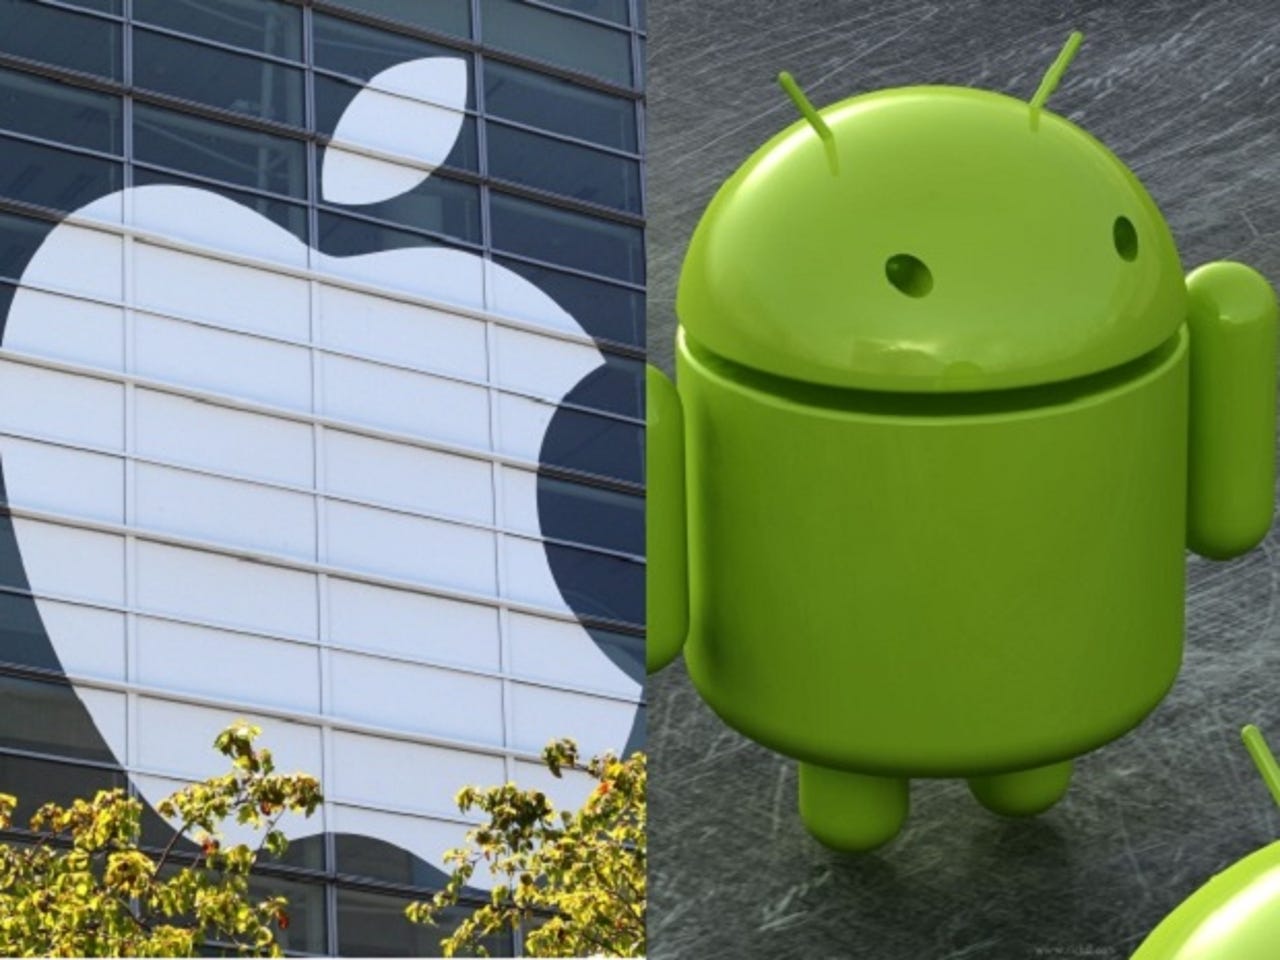 iphone-vs-android-the-battle-of-manhattan.jpg